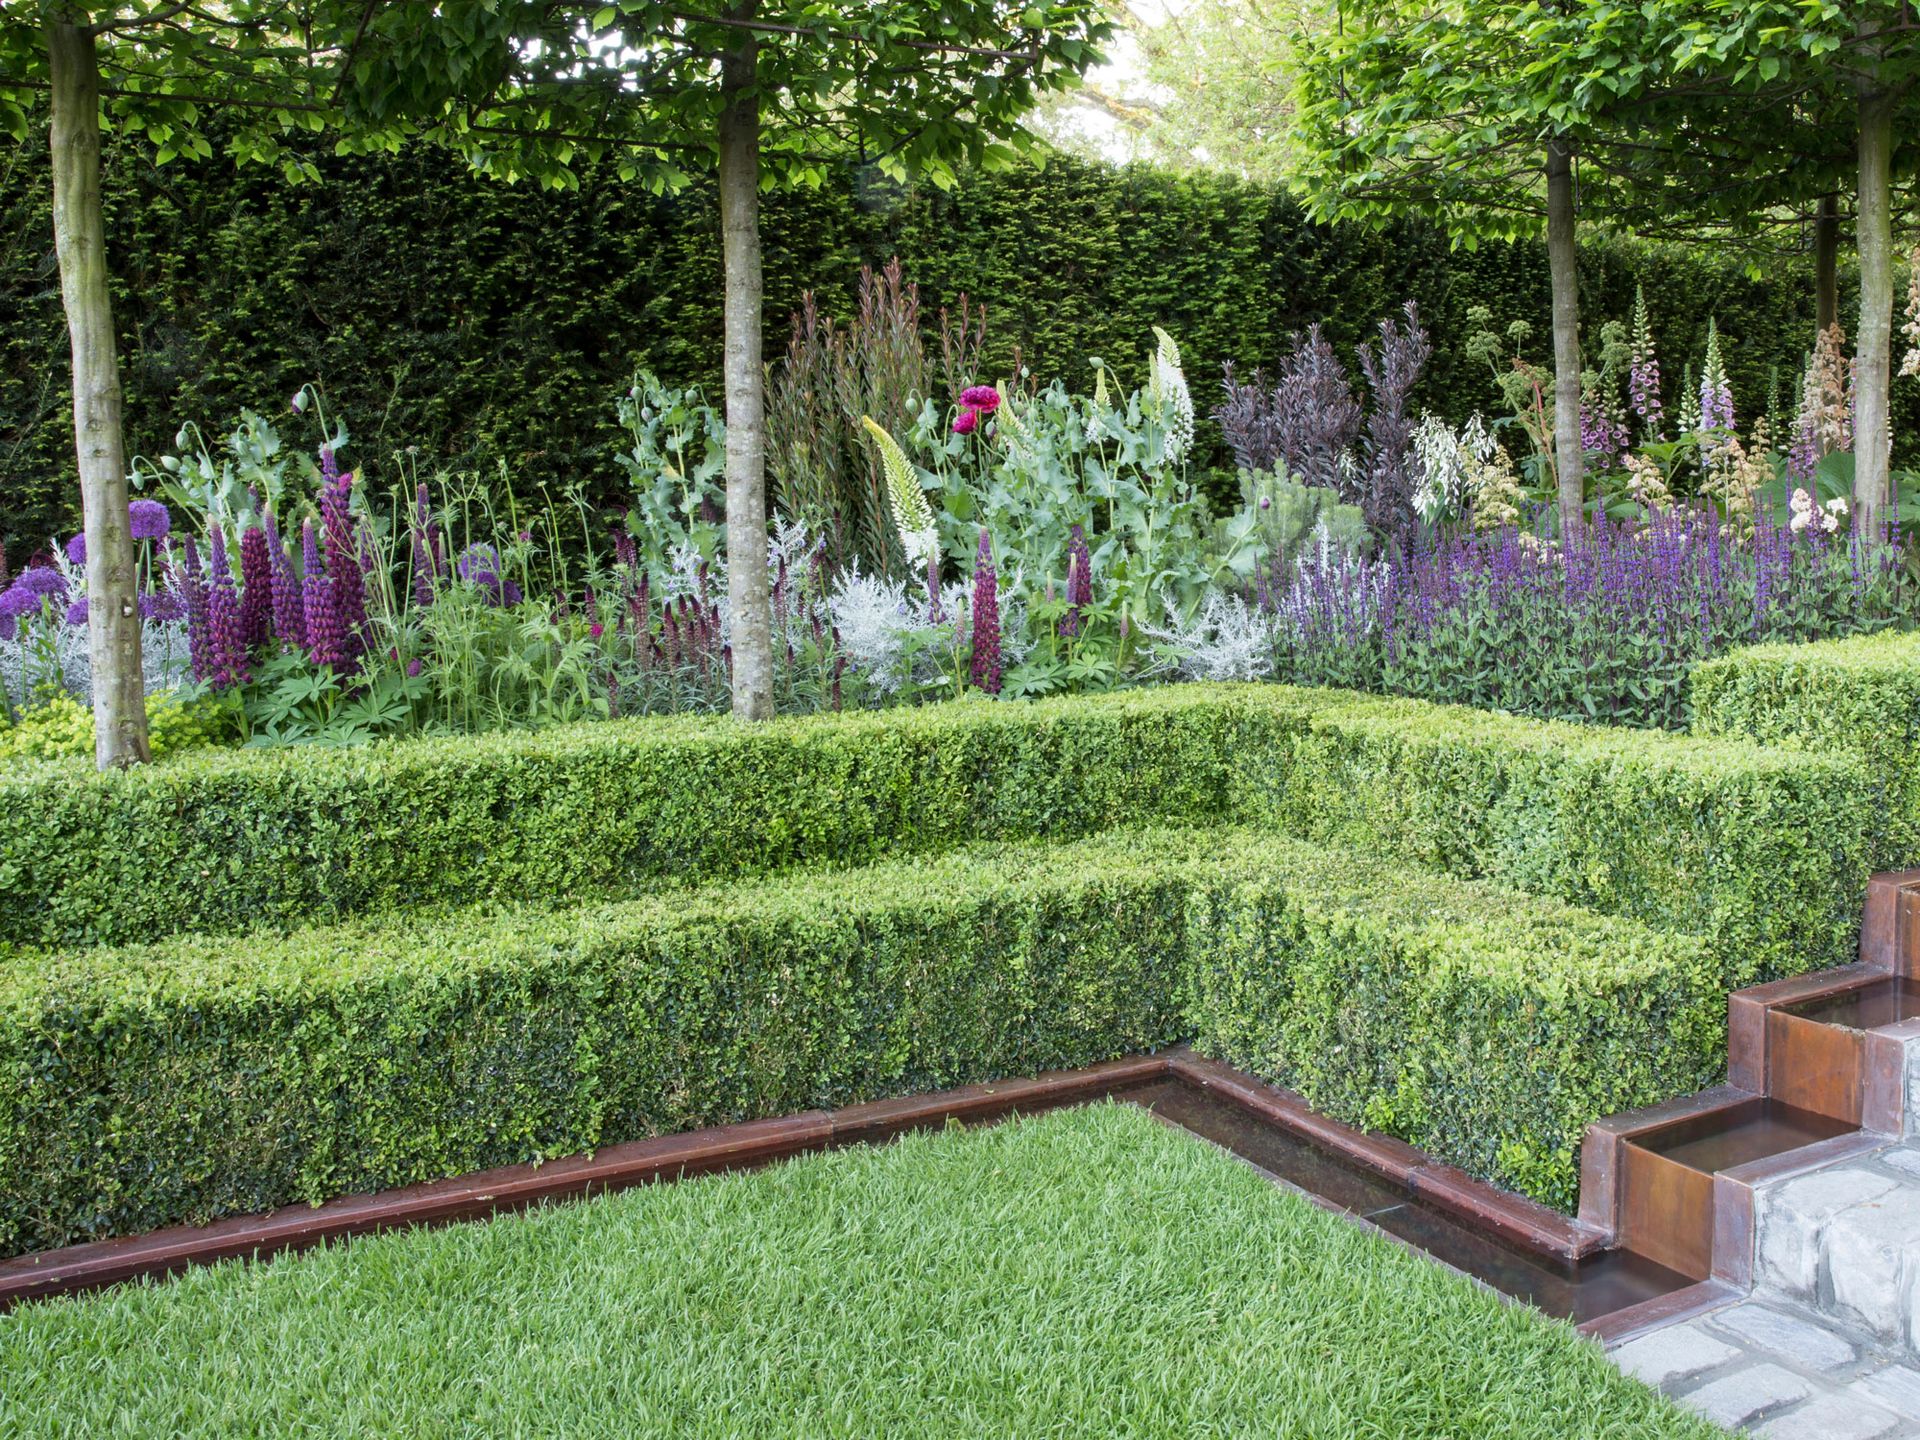 Lawn edging ideas – 10 ways to add a professional touch | Livingetc